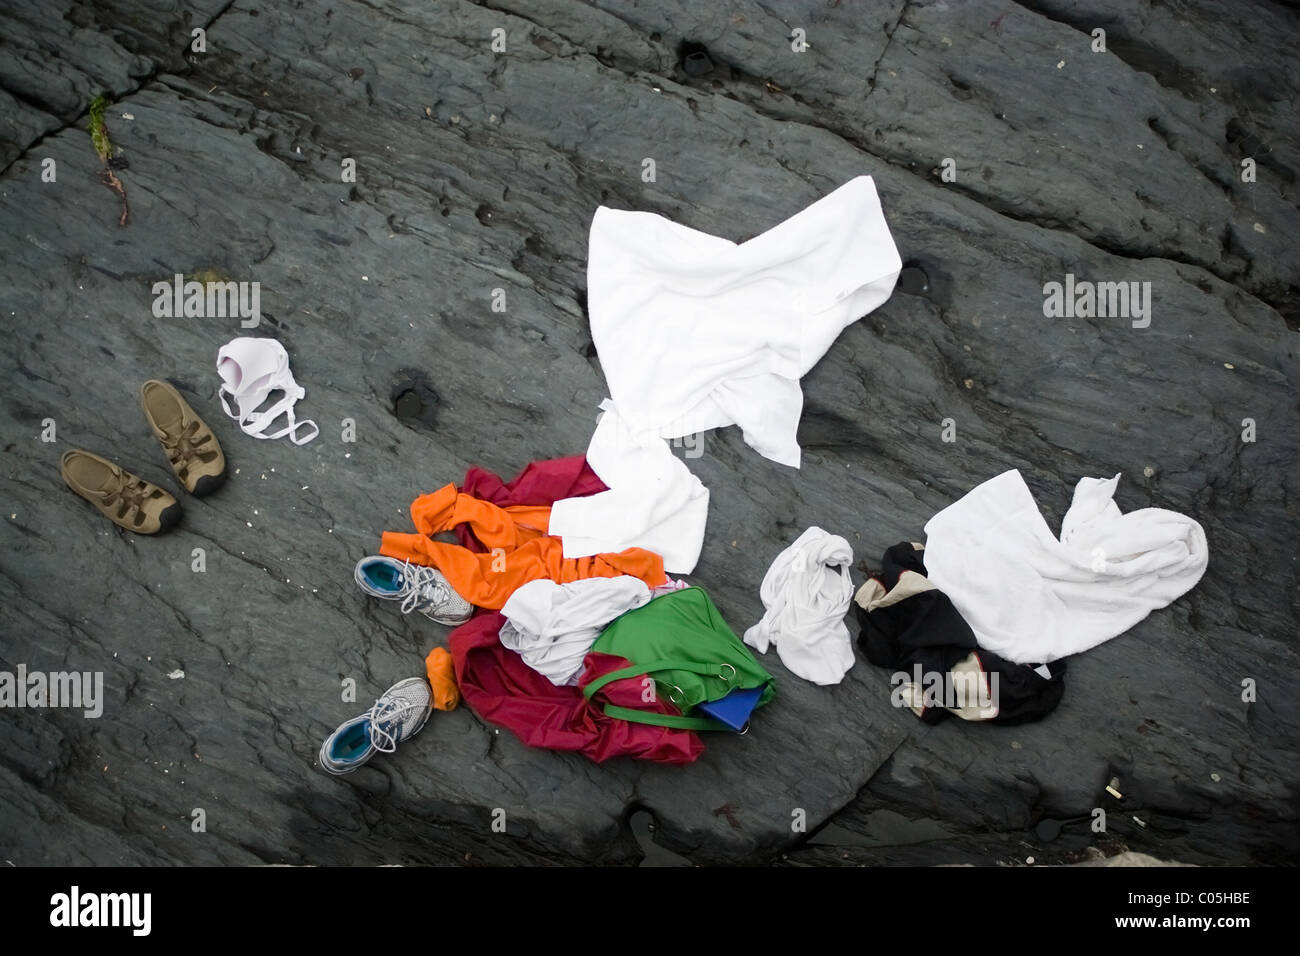 Some swimmers went skinny dipping in the ocean and left their clothes behind on the rocks ashore. Stock Photo